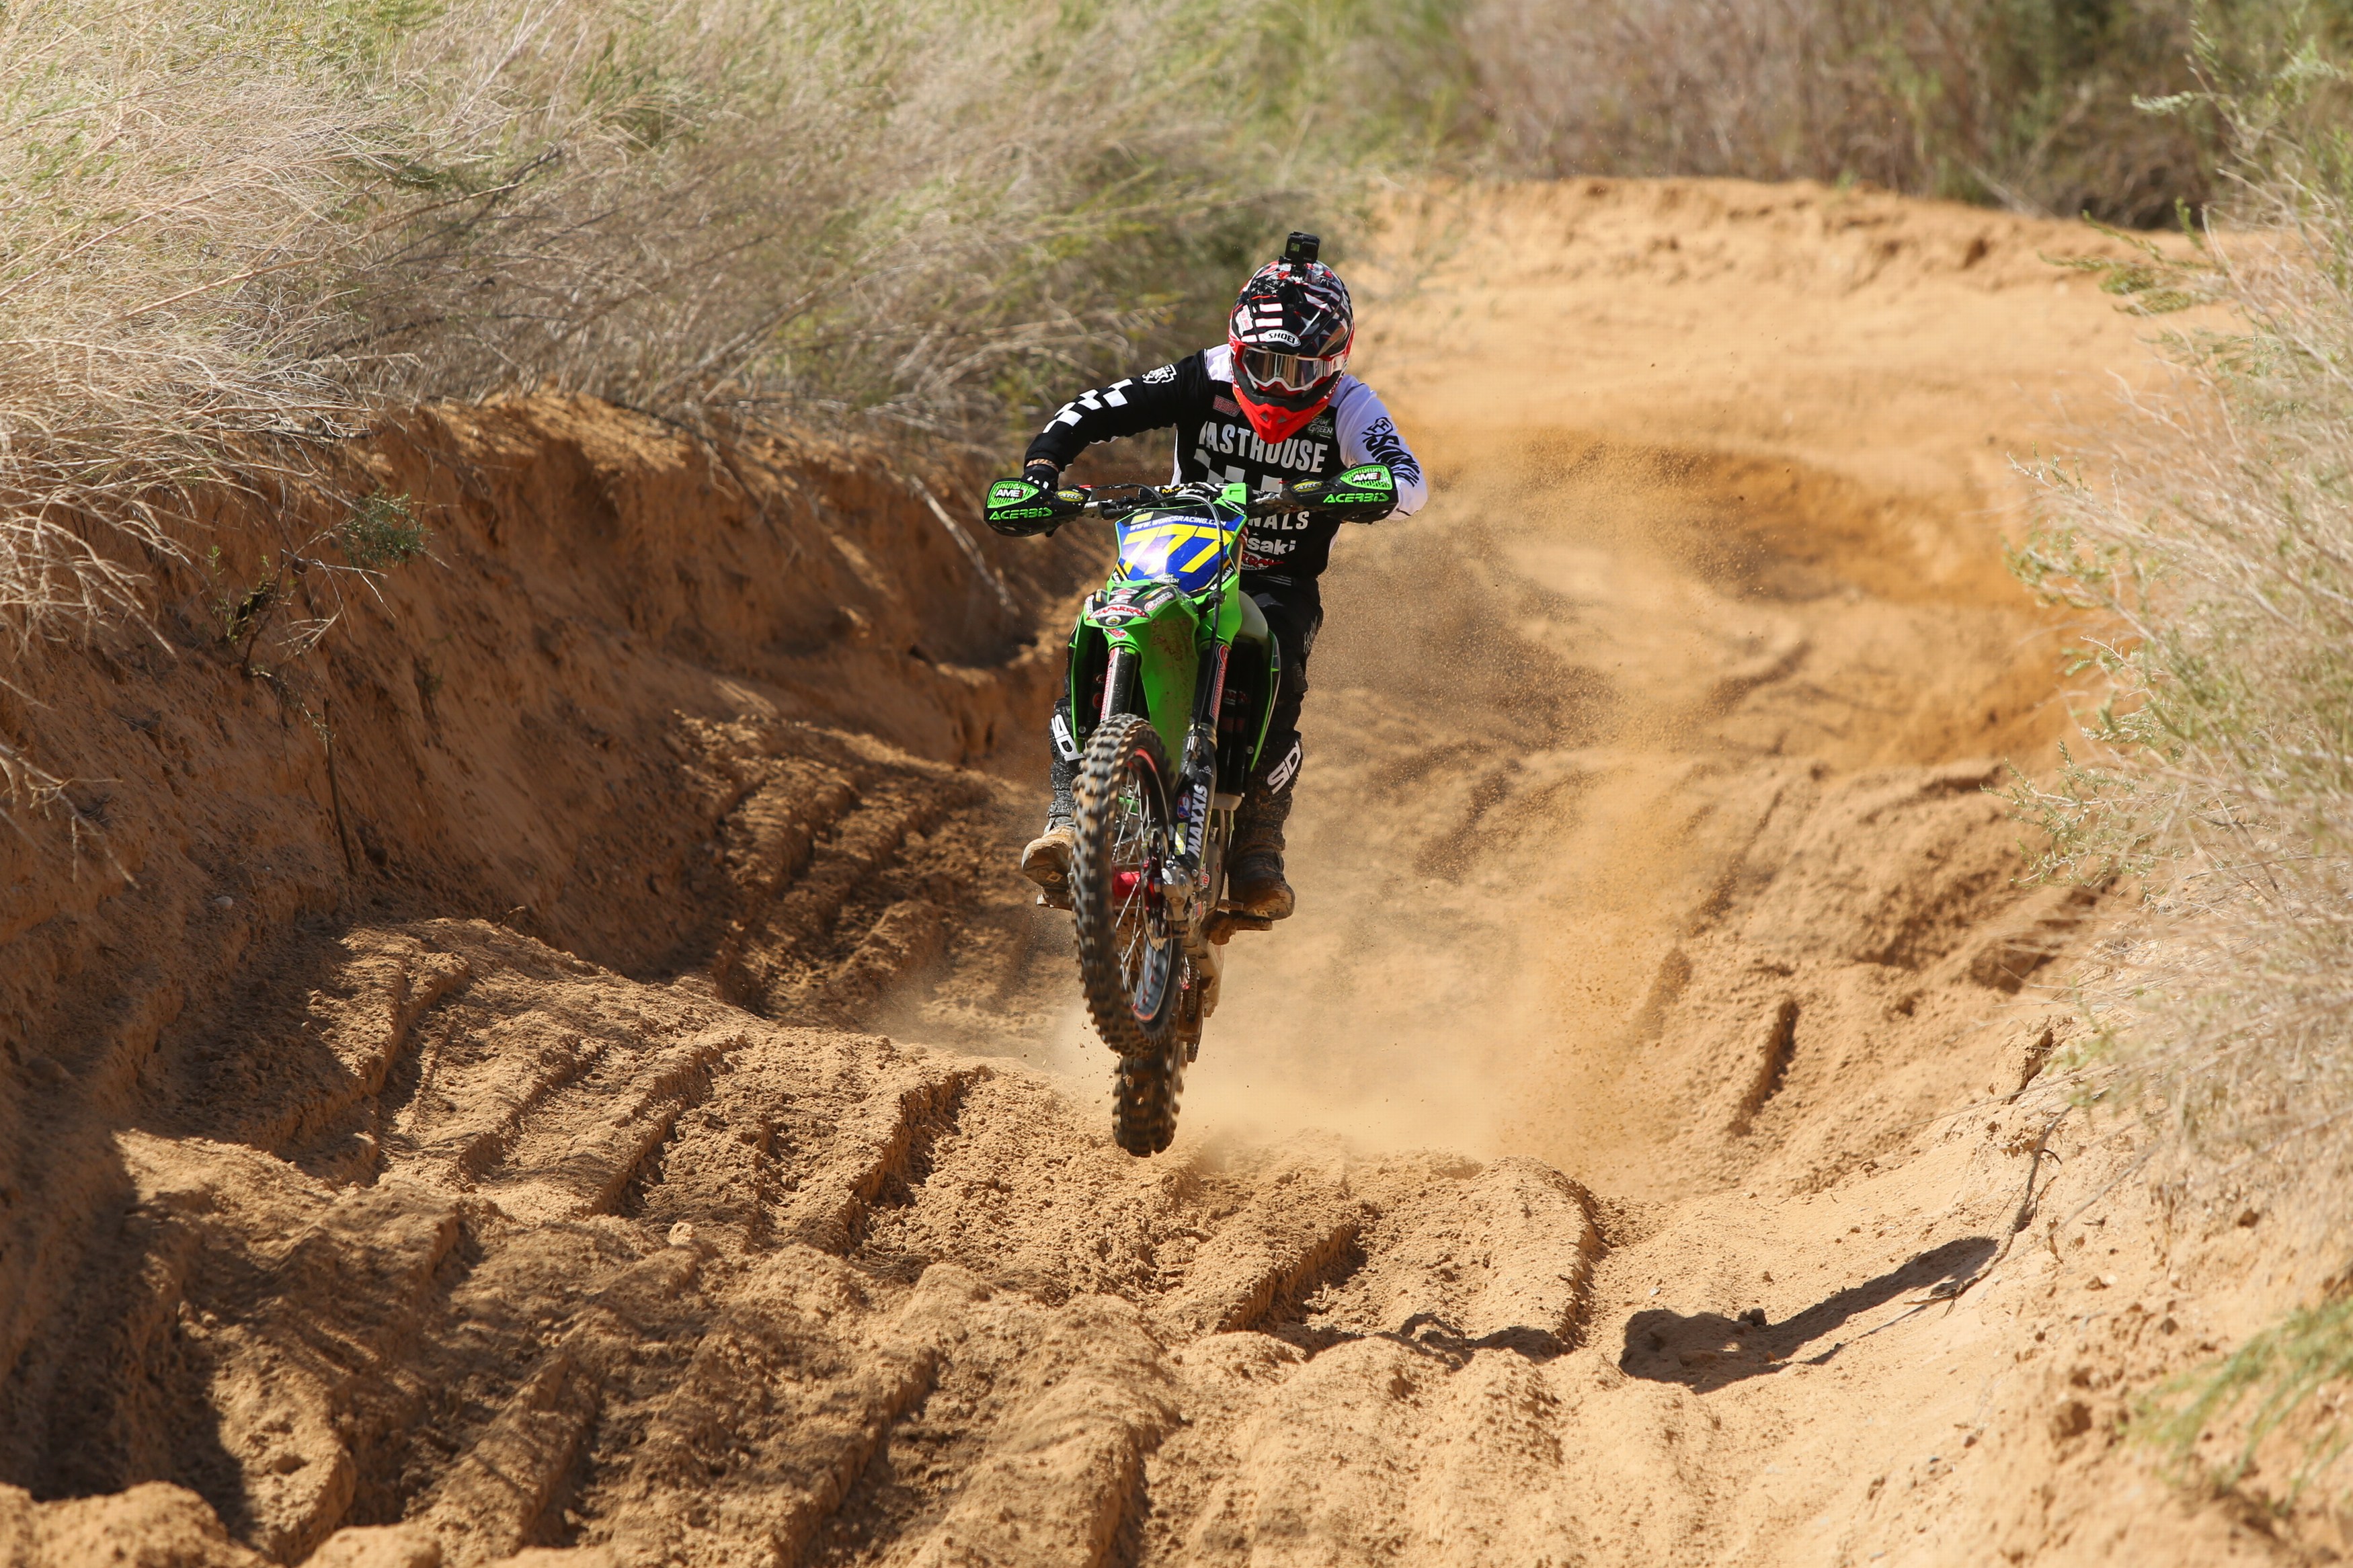 MX Meets Off-Road: Precision Concepts Racing and their 2019 KX450